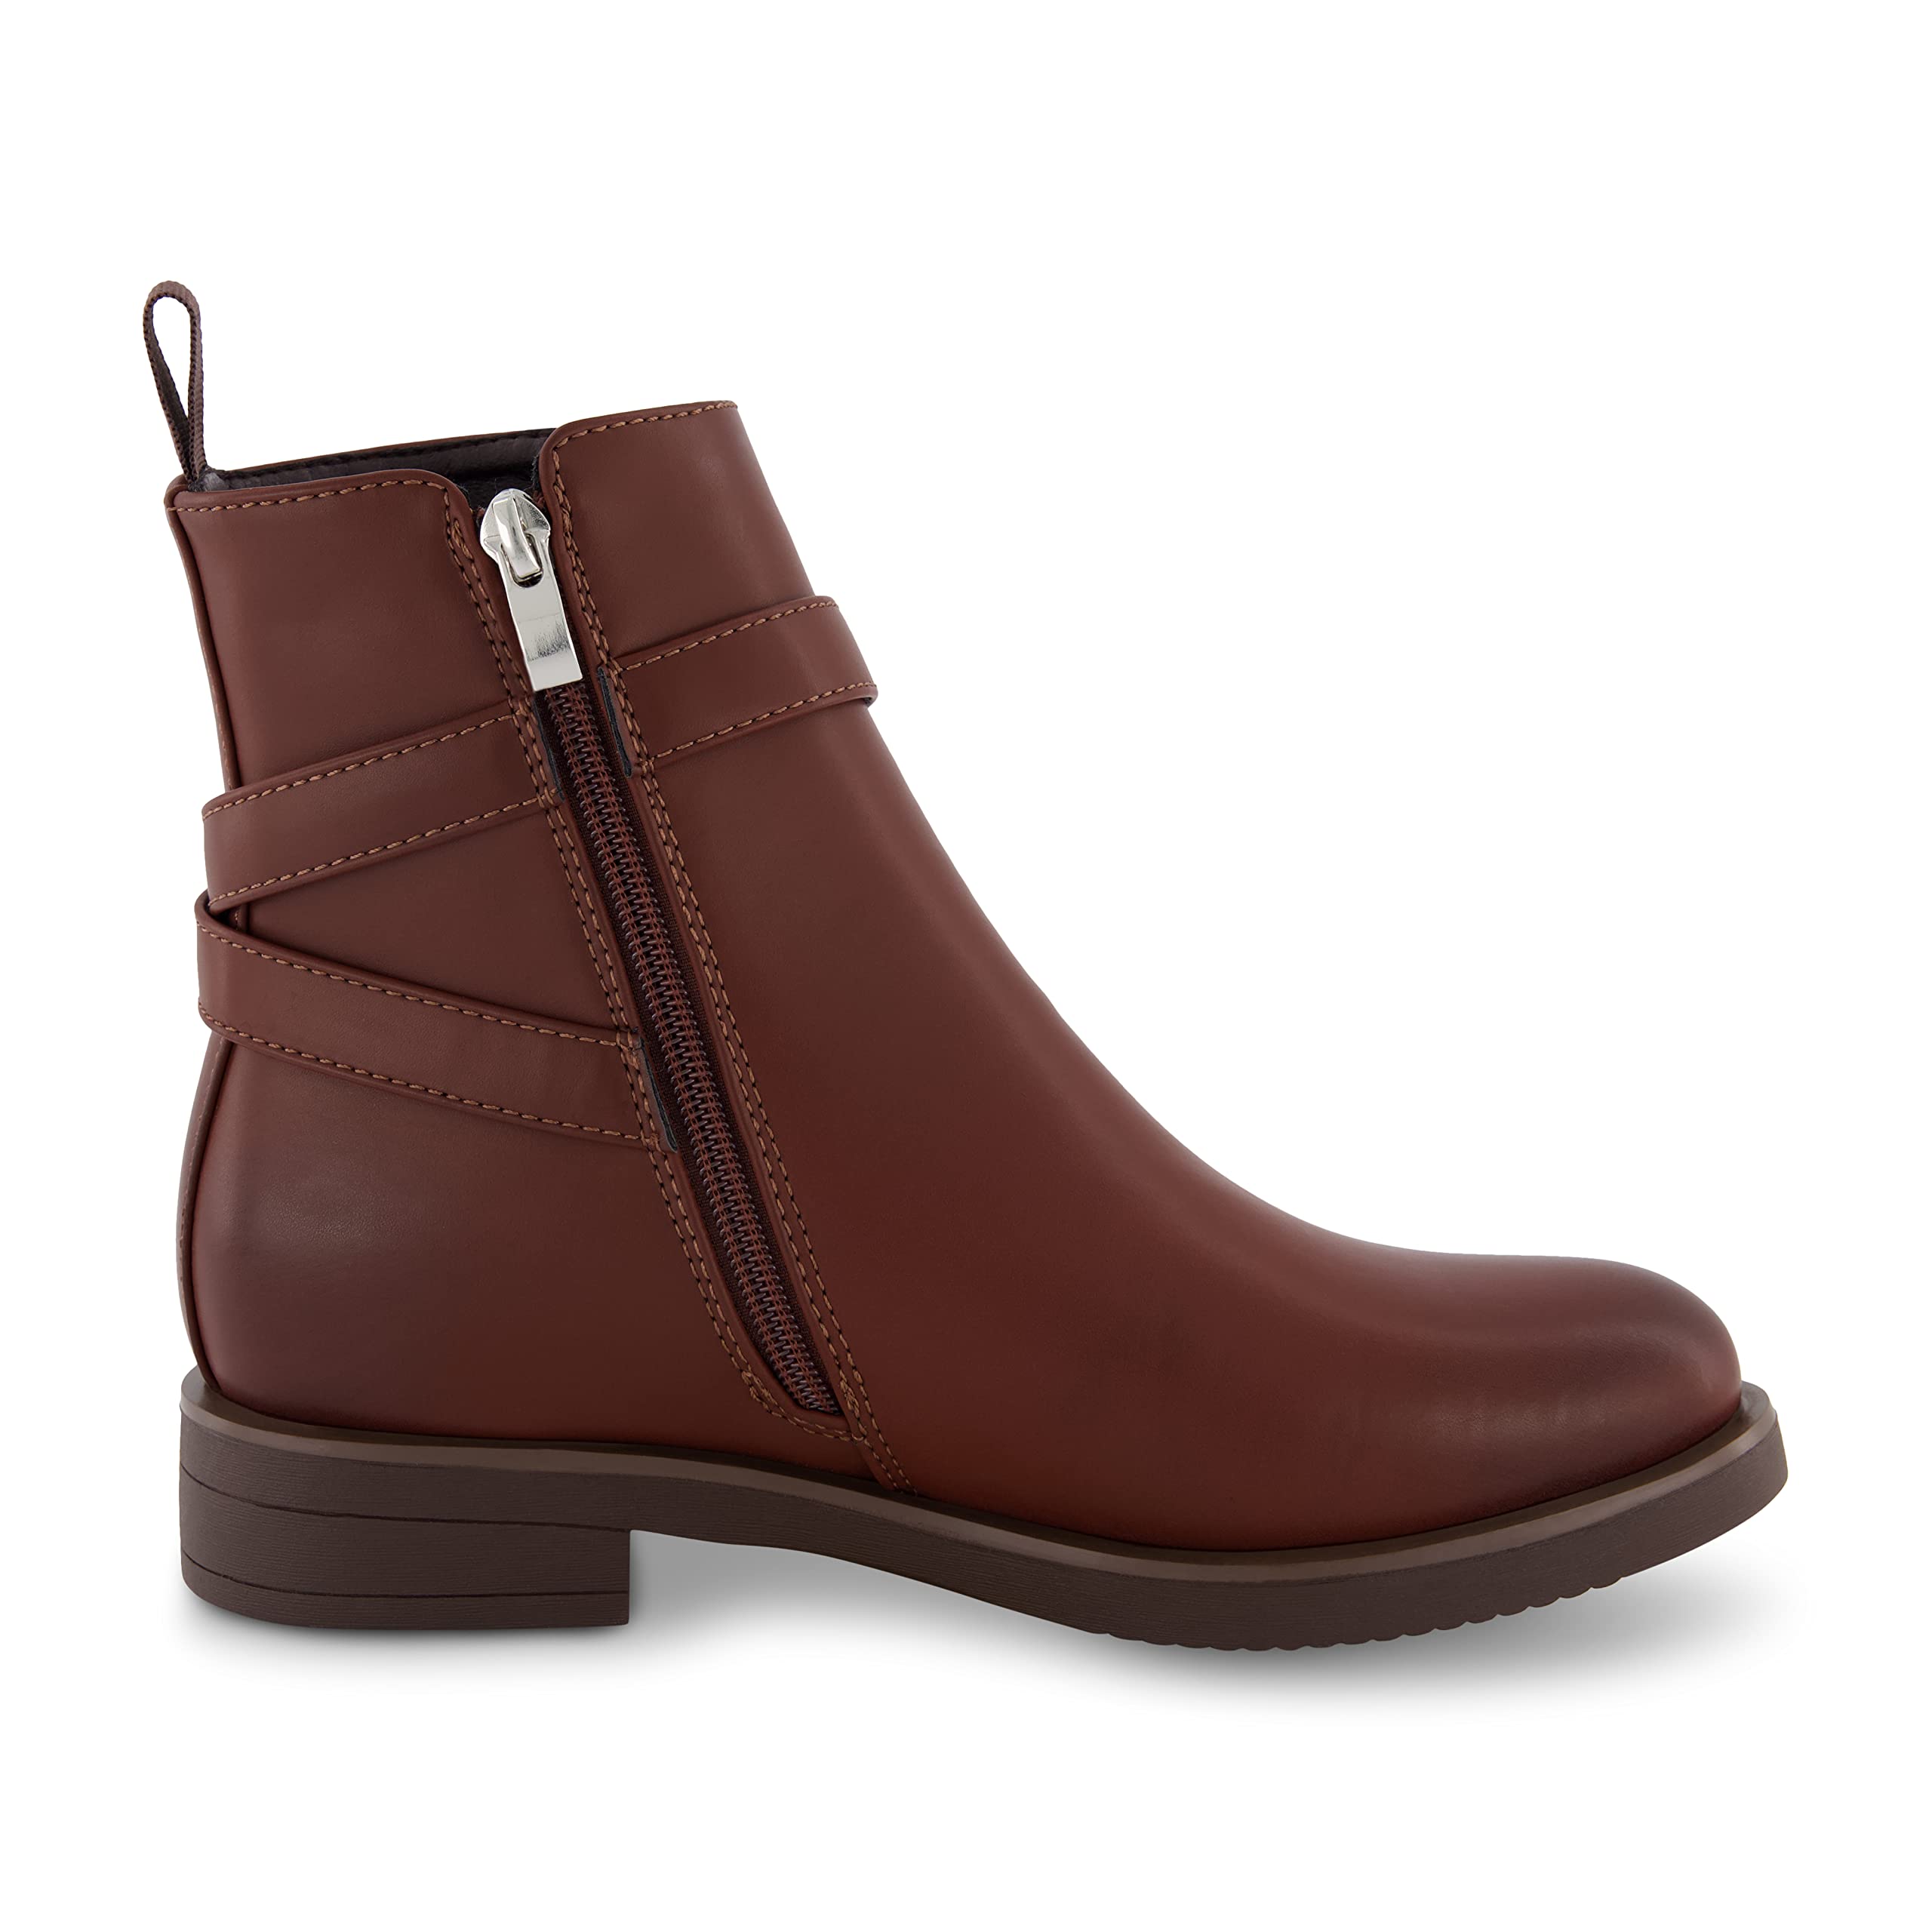 CUSHIONAIRE Women's Brumelle strap boot +Memory Foam, Wide Widths Available